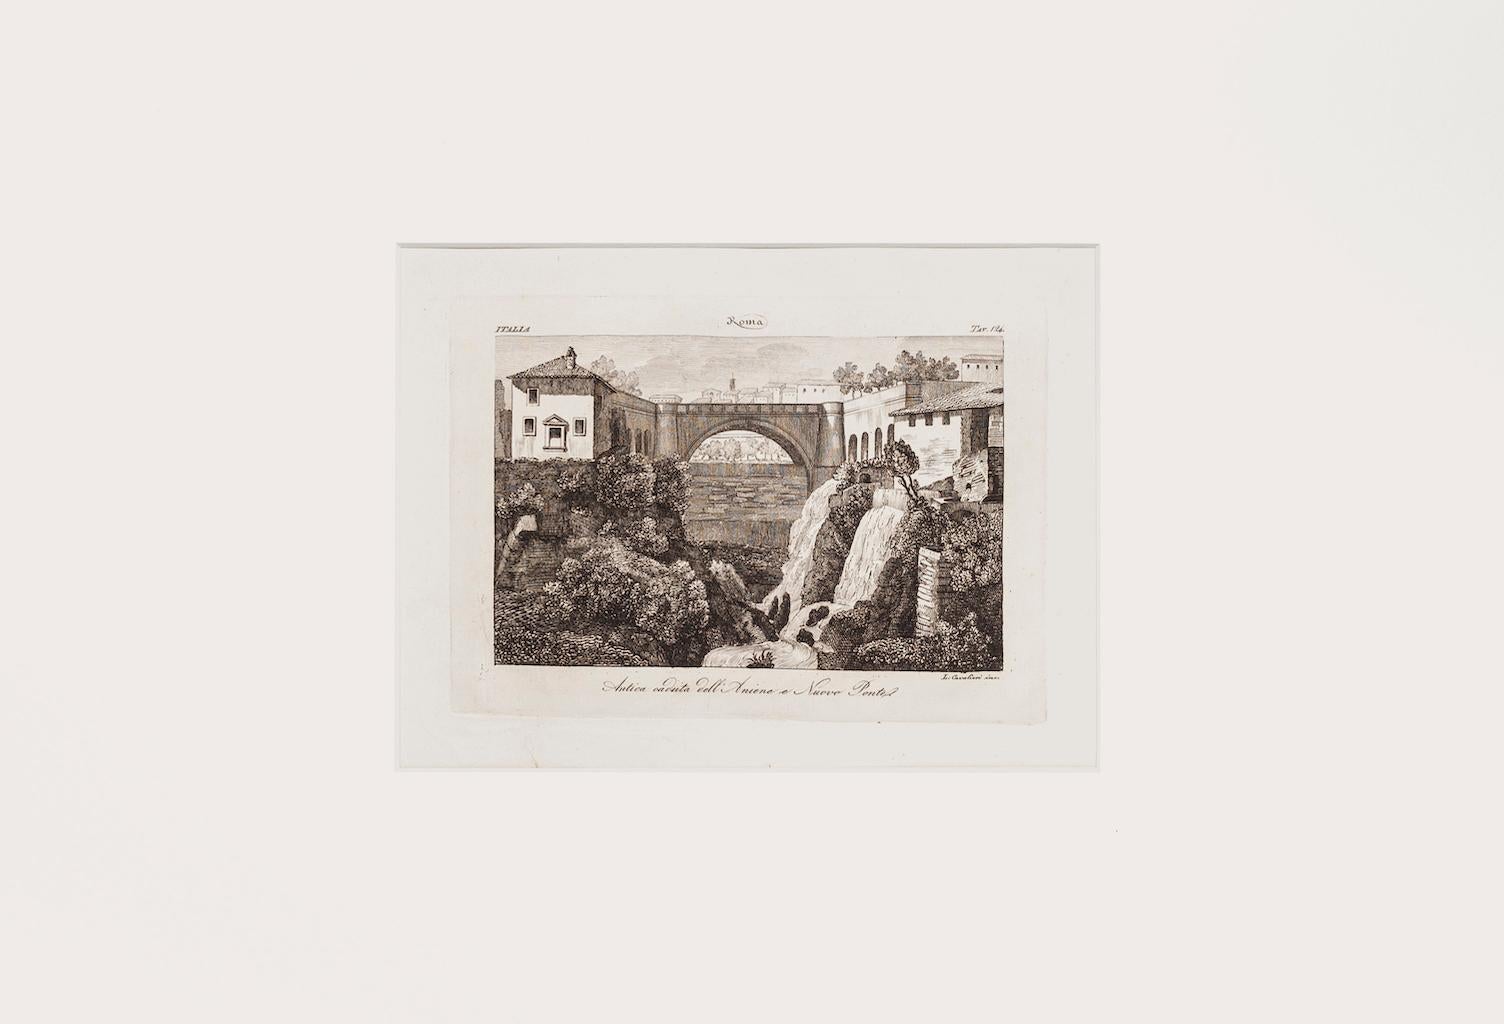 Aniene is an original etching realized by L.Cavalieri in the 19th Century.

Signed on the plate on the lower right corner. Tav.124

Good conditions.

Passepartout included: 34 x 49.

Image Dimensions: 13 x 18.5

This artwork shows a glimpse New